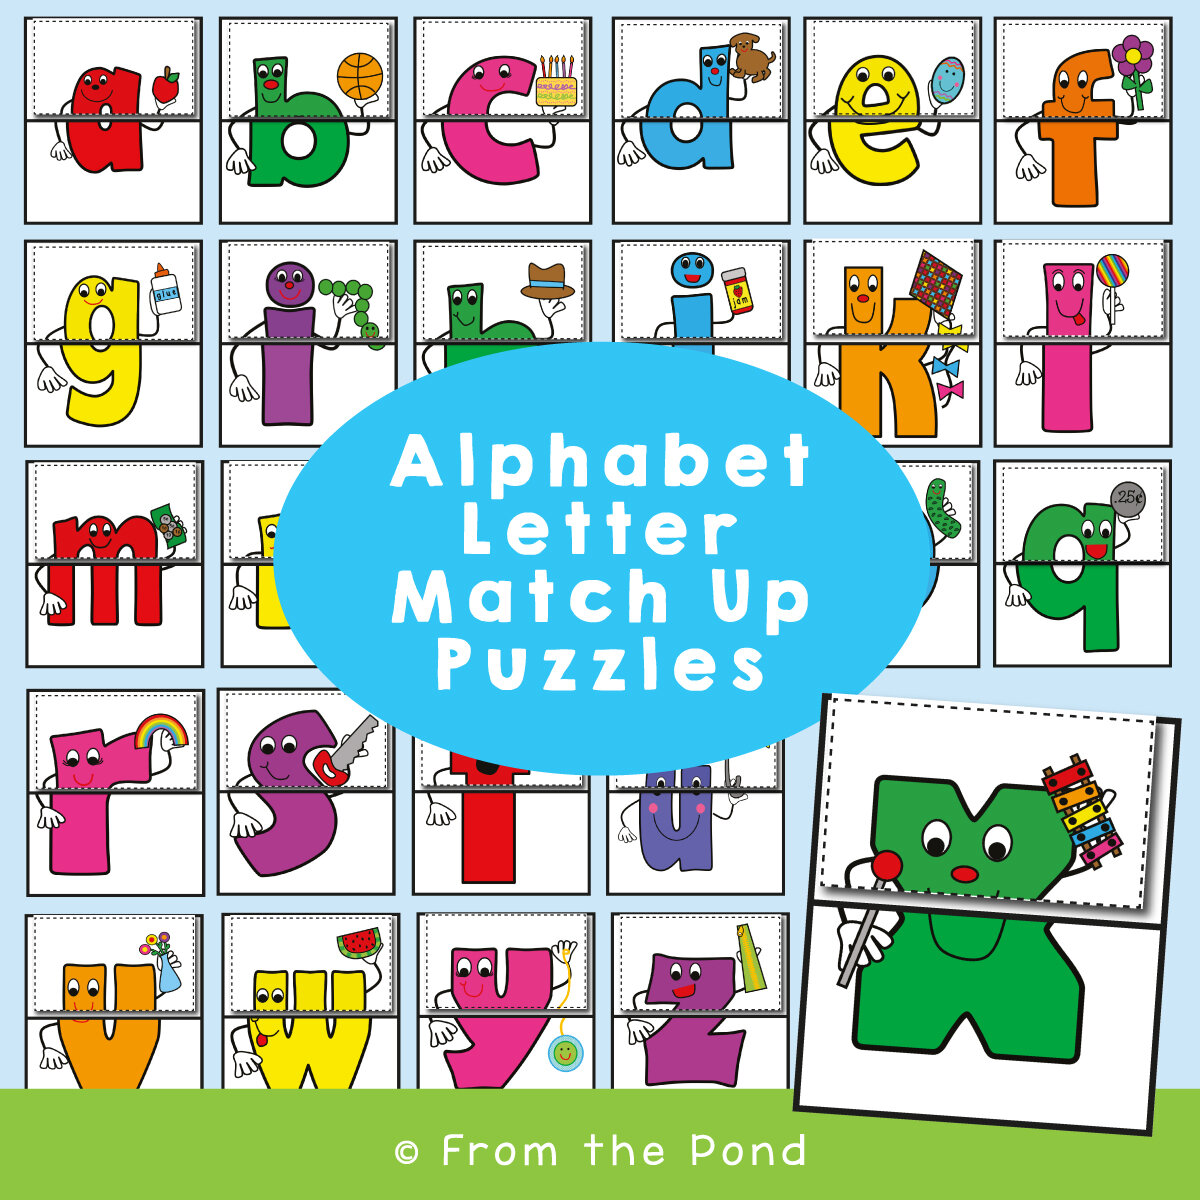 Letter Match Up Puzzles